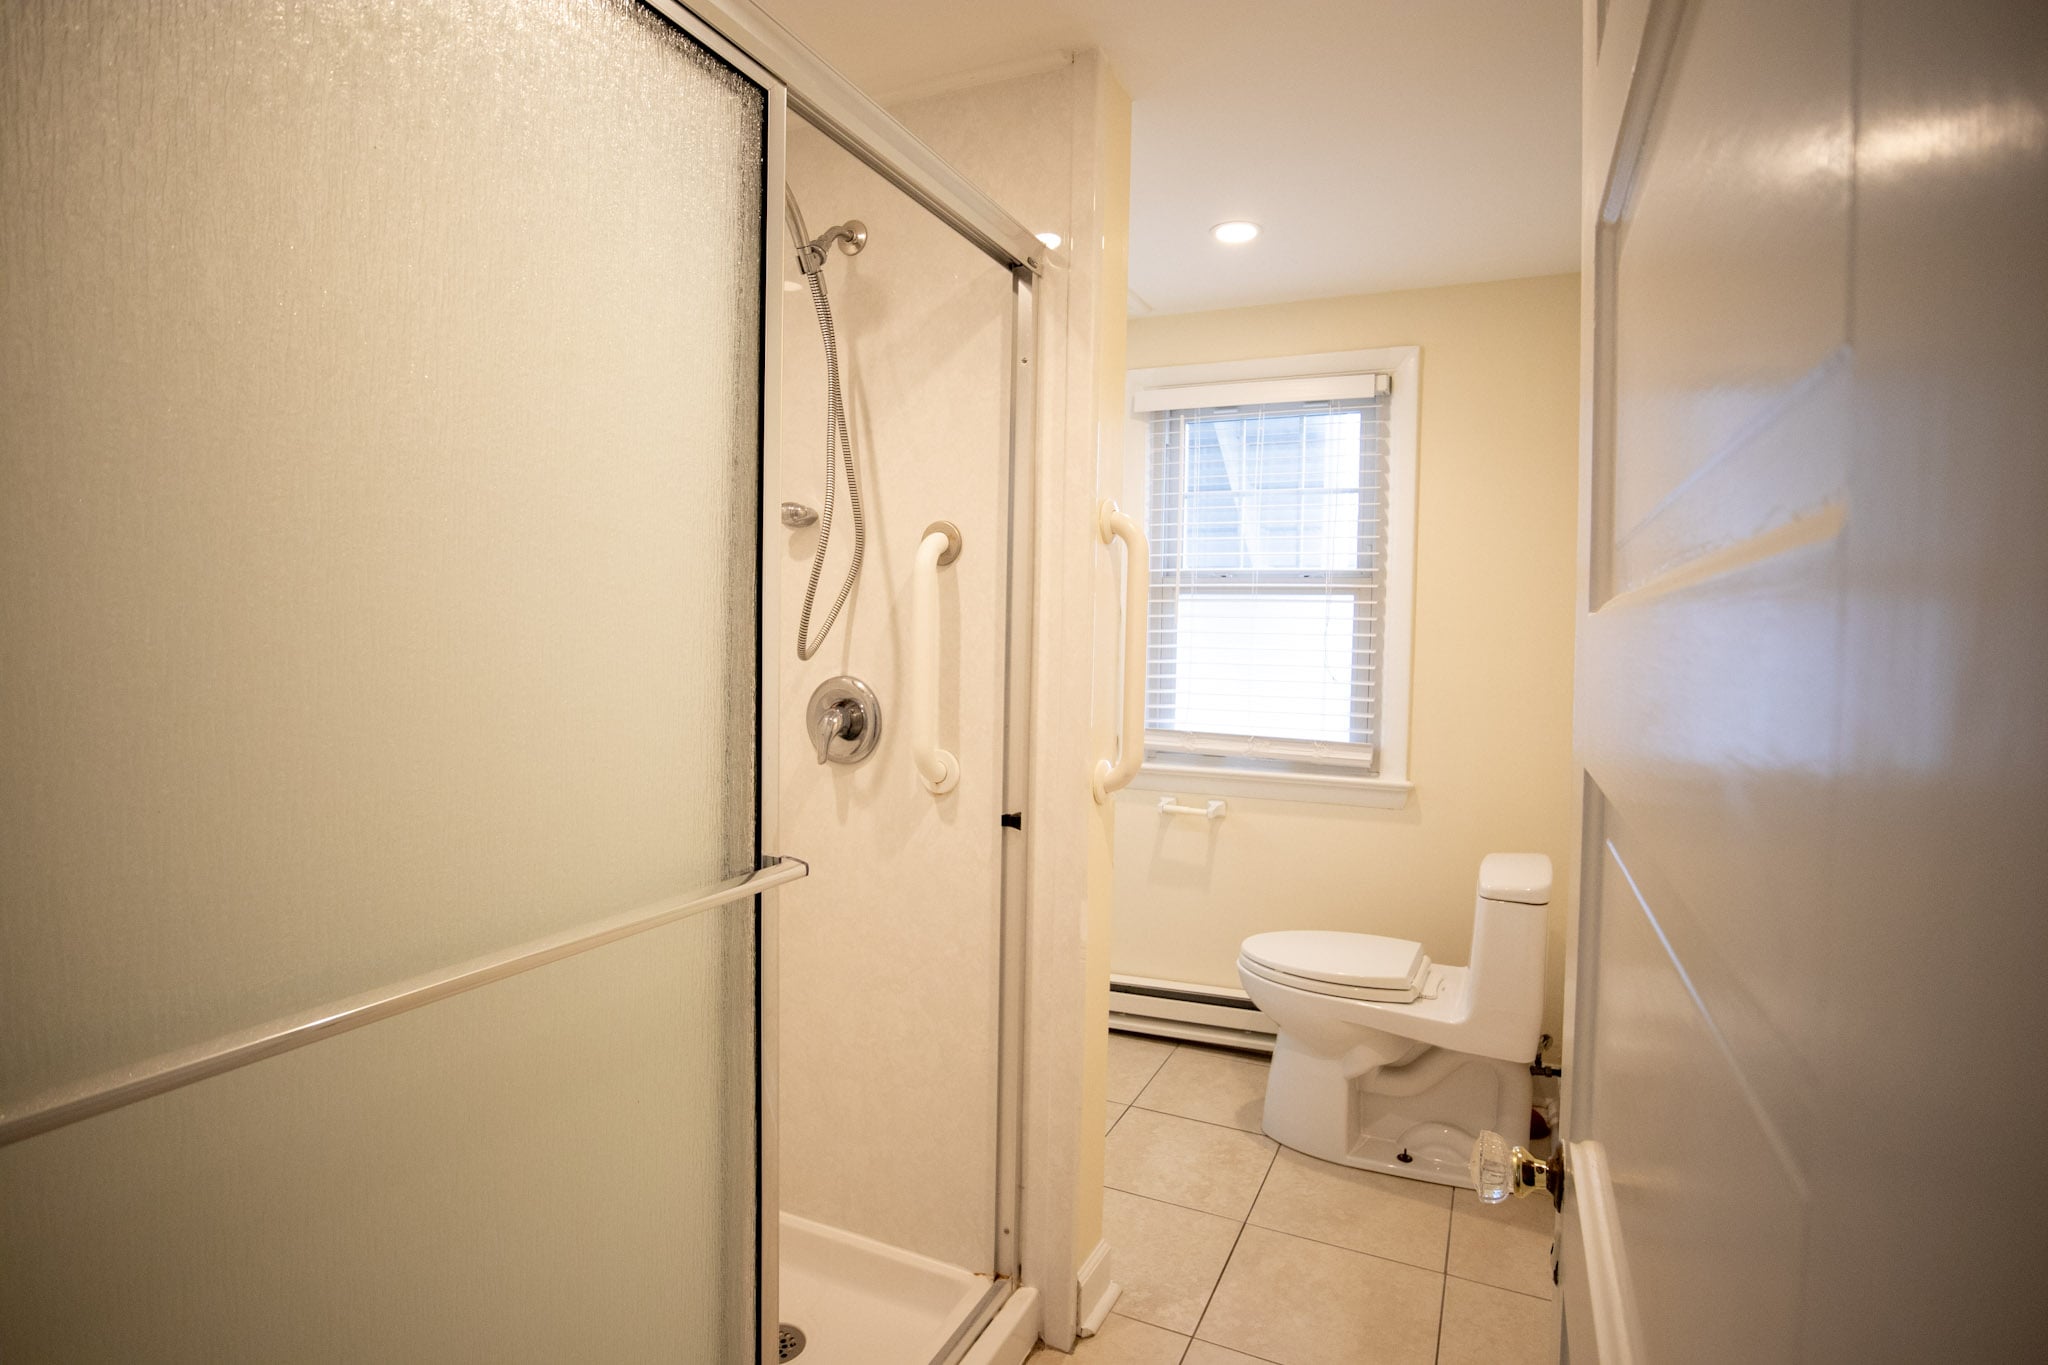 Spacious bathroom with white tile floors at the Majestic Hotel in Ocean City, Maryland